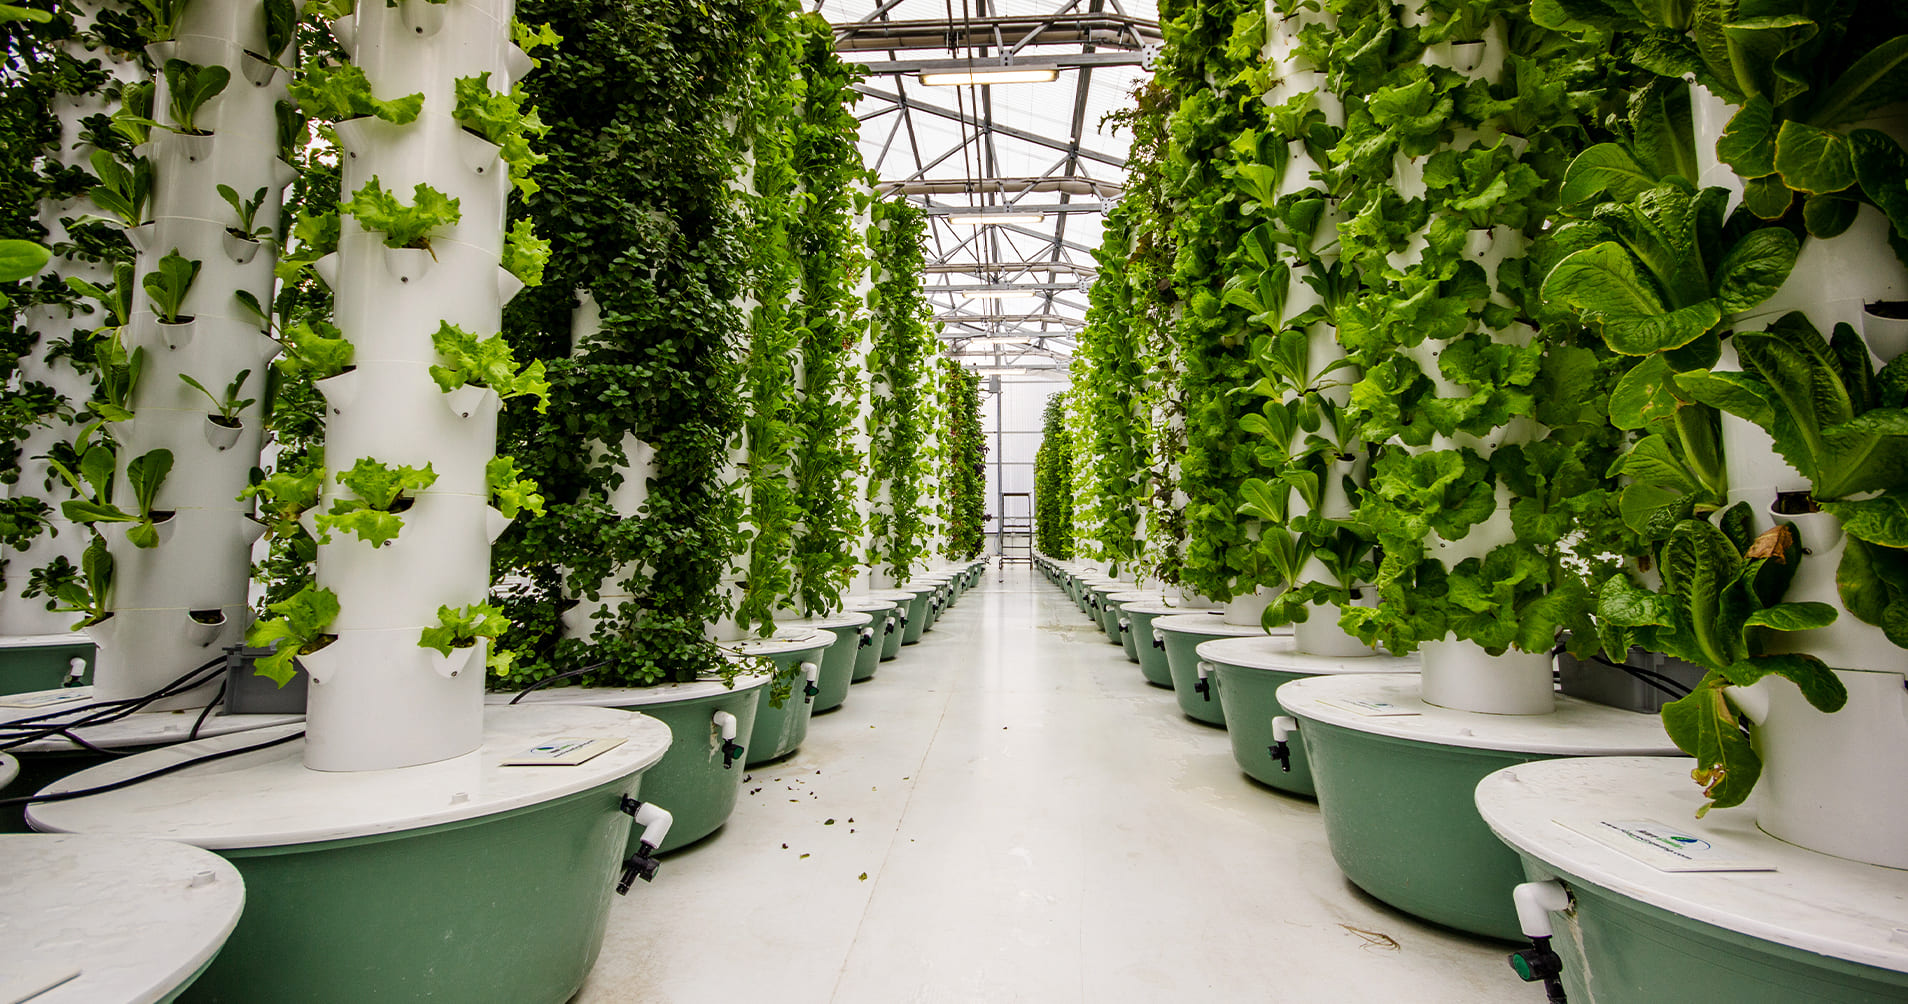 Aeroponics: Soilless, Water-Efficient, & Space-Saving Cultivation